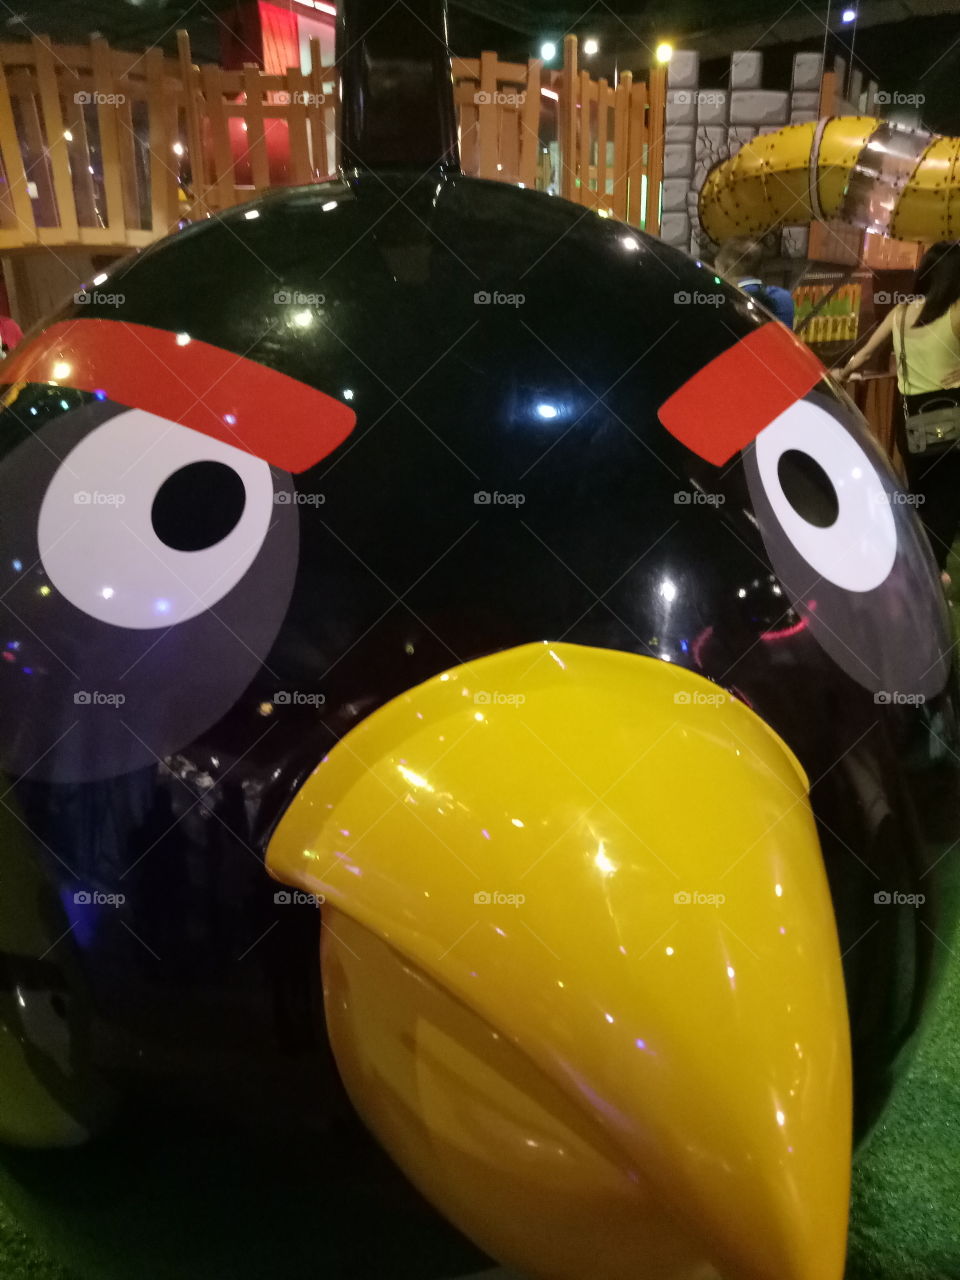 Black angry bird is coming